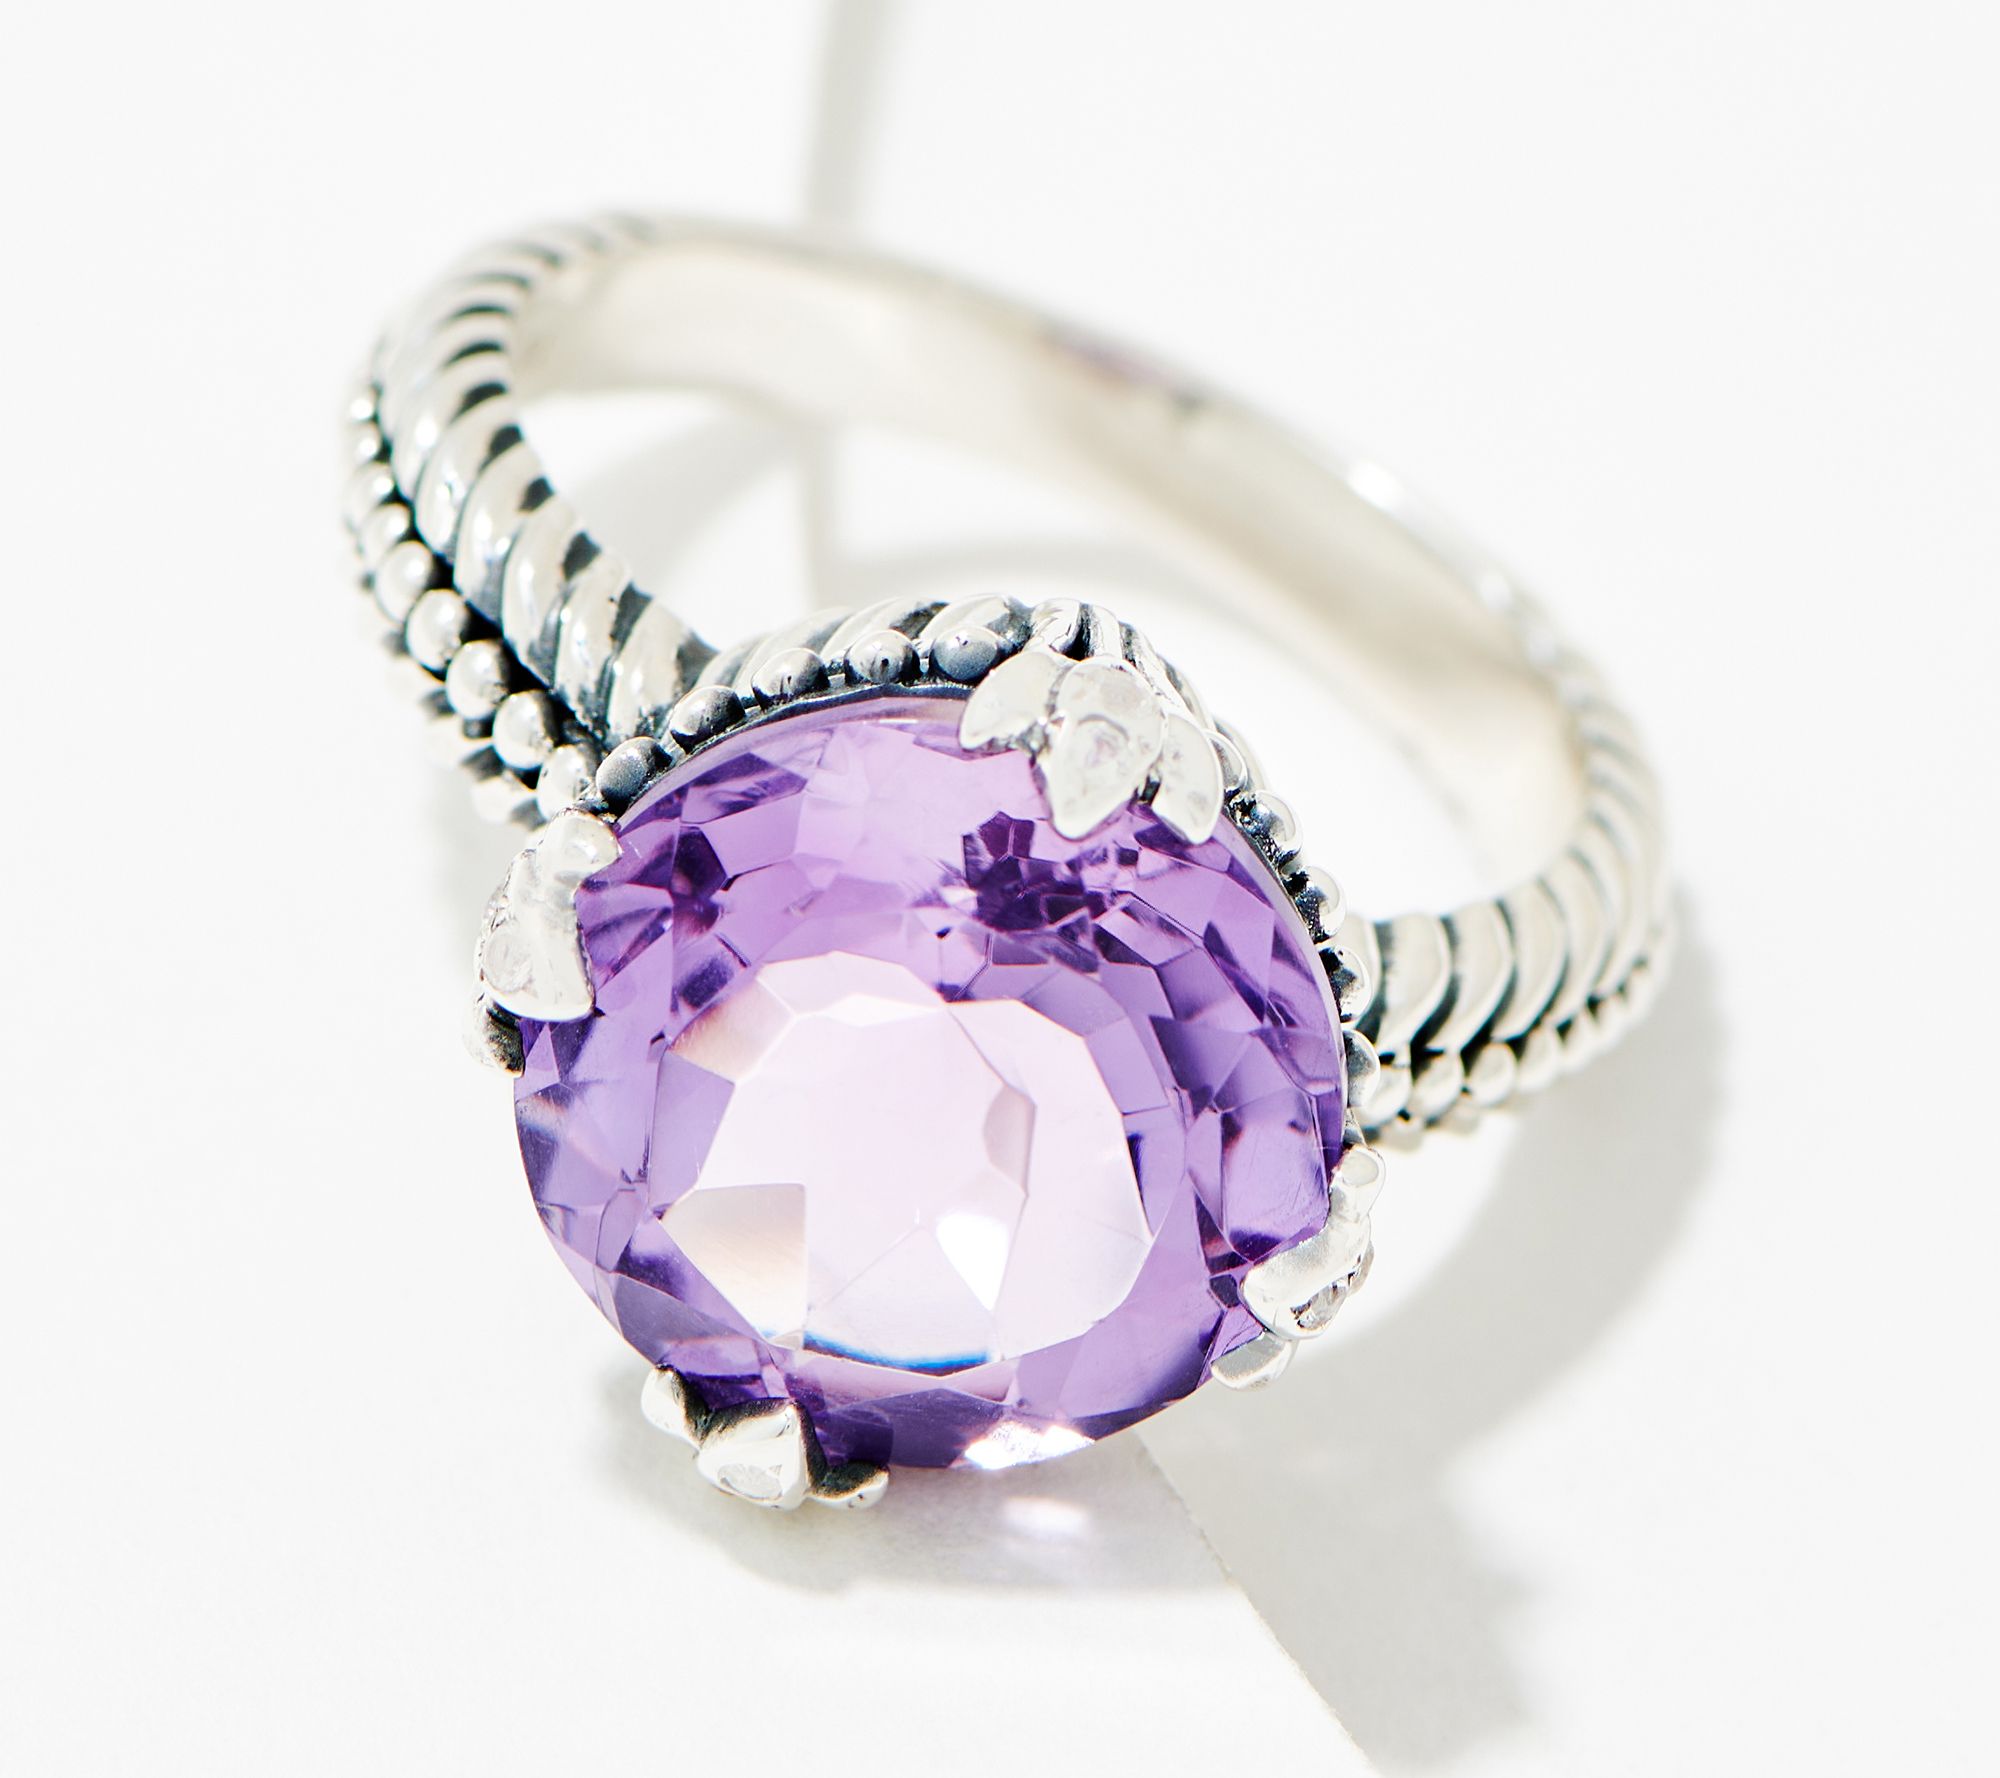 Artisan Crafted Manse Pink Robert Ring Silver Sterling by Solitaire Amethyst